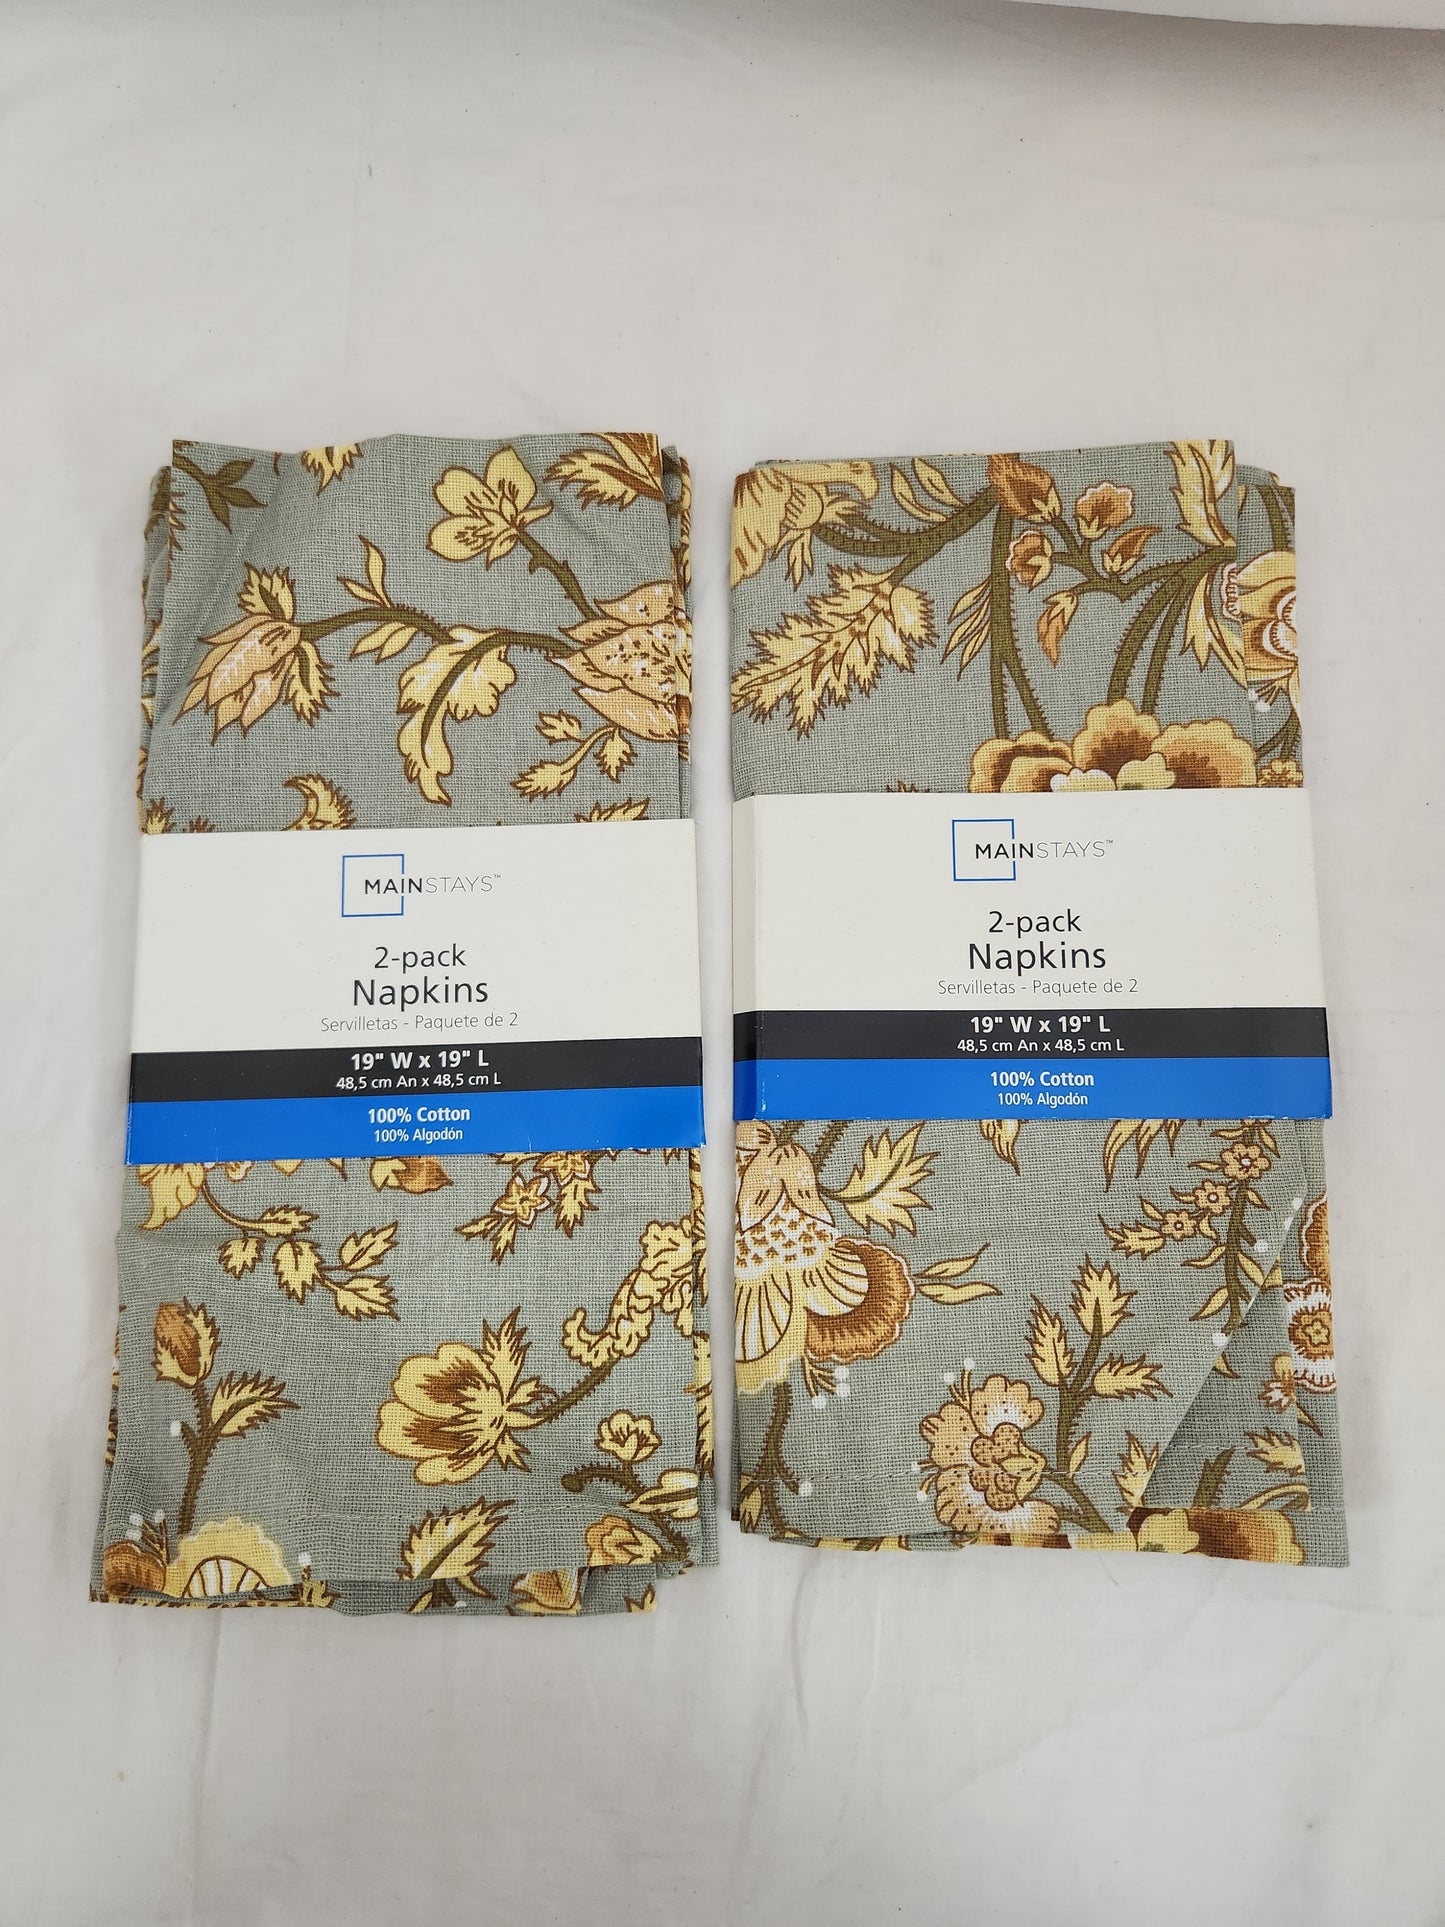 NIP - Mainstays 19"x19" Cotton French Floral Napkins